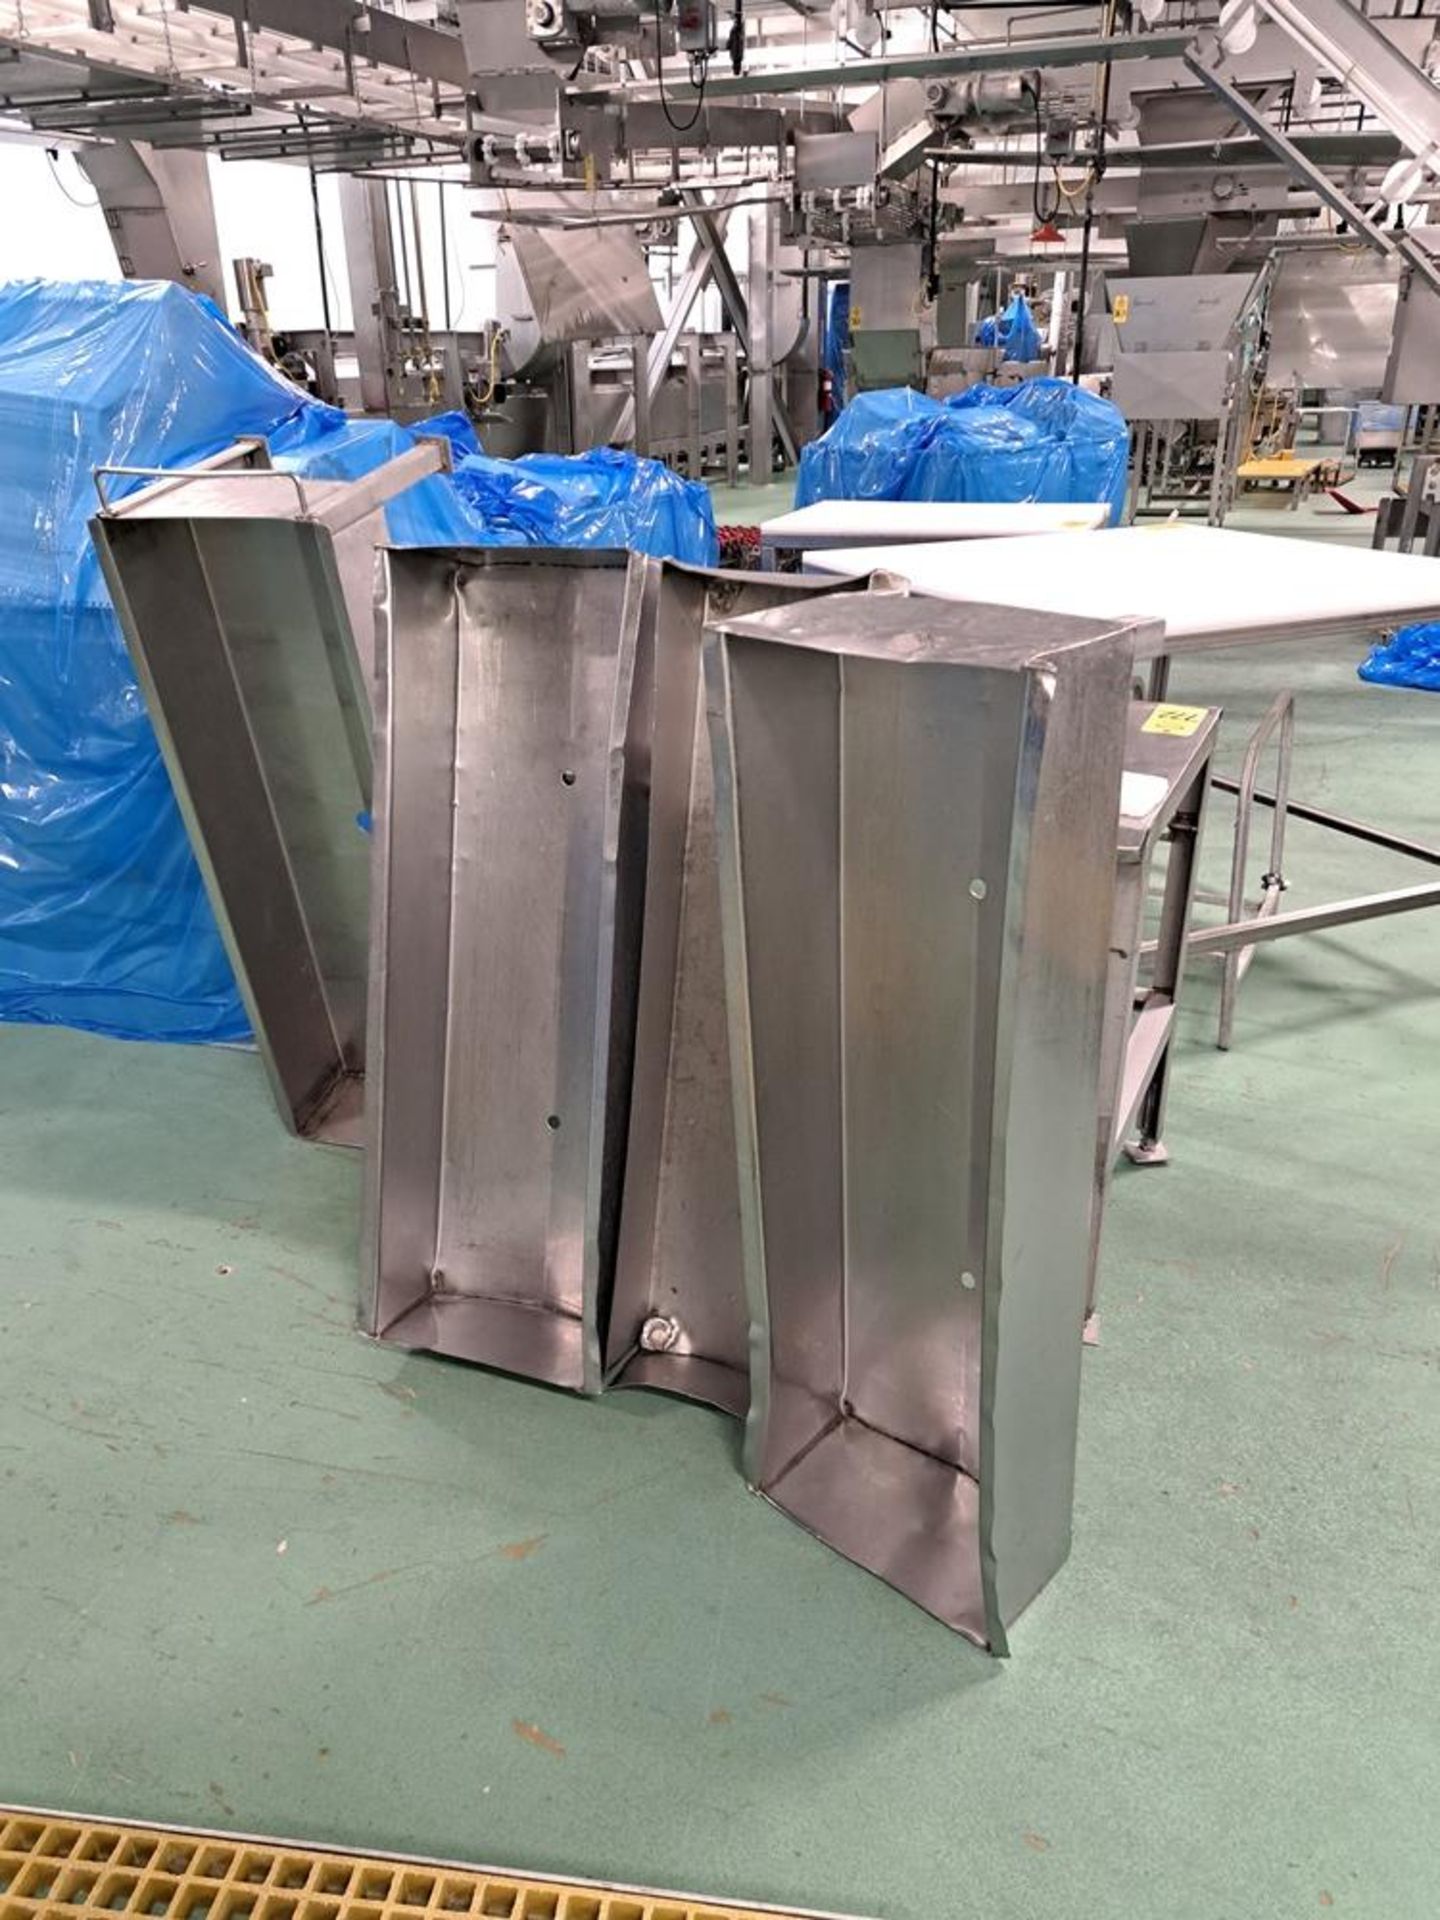 Lot Stainless Steel Table, (4) Stainless Steel Bins, 12" W X 4' L X 6" D: Required Loading Fee $ - Image 2 of 2